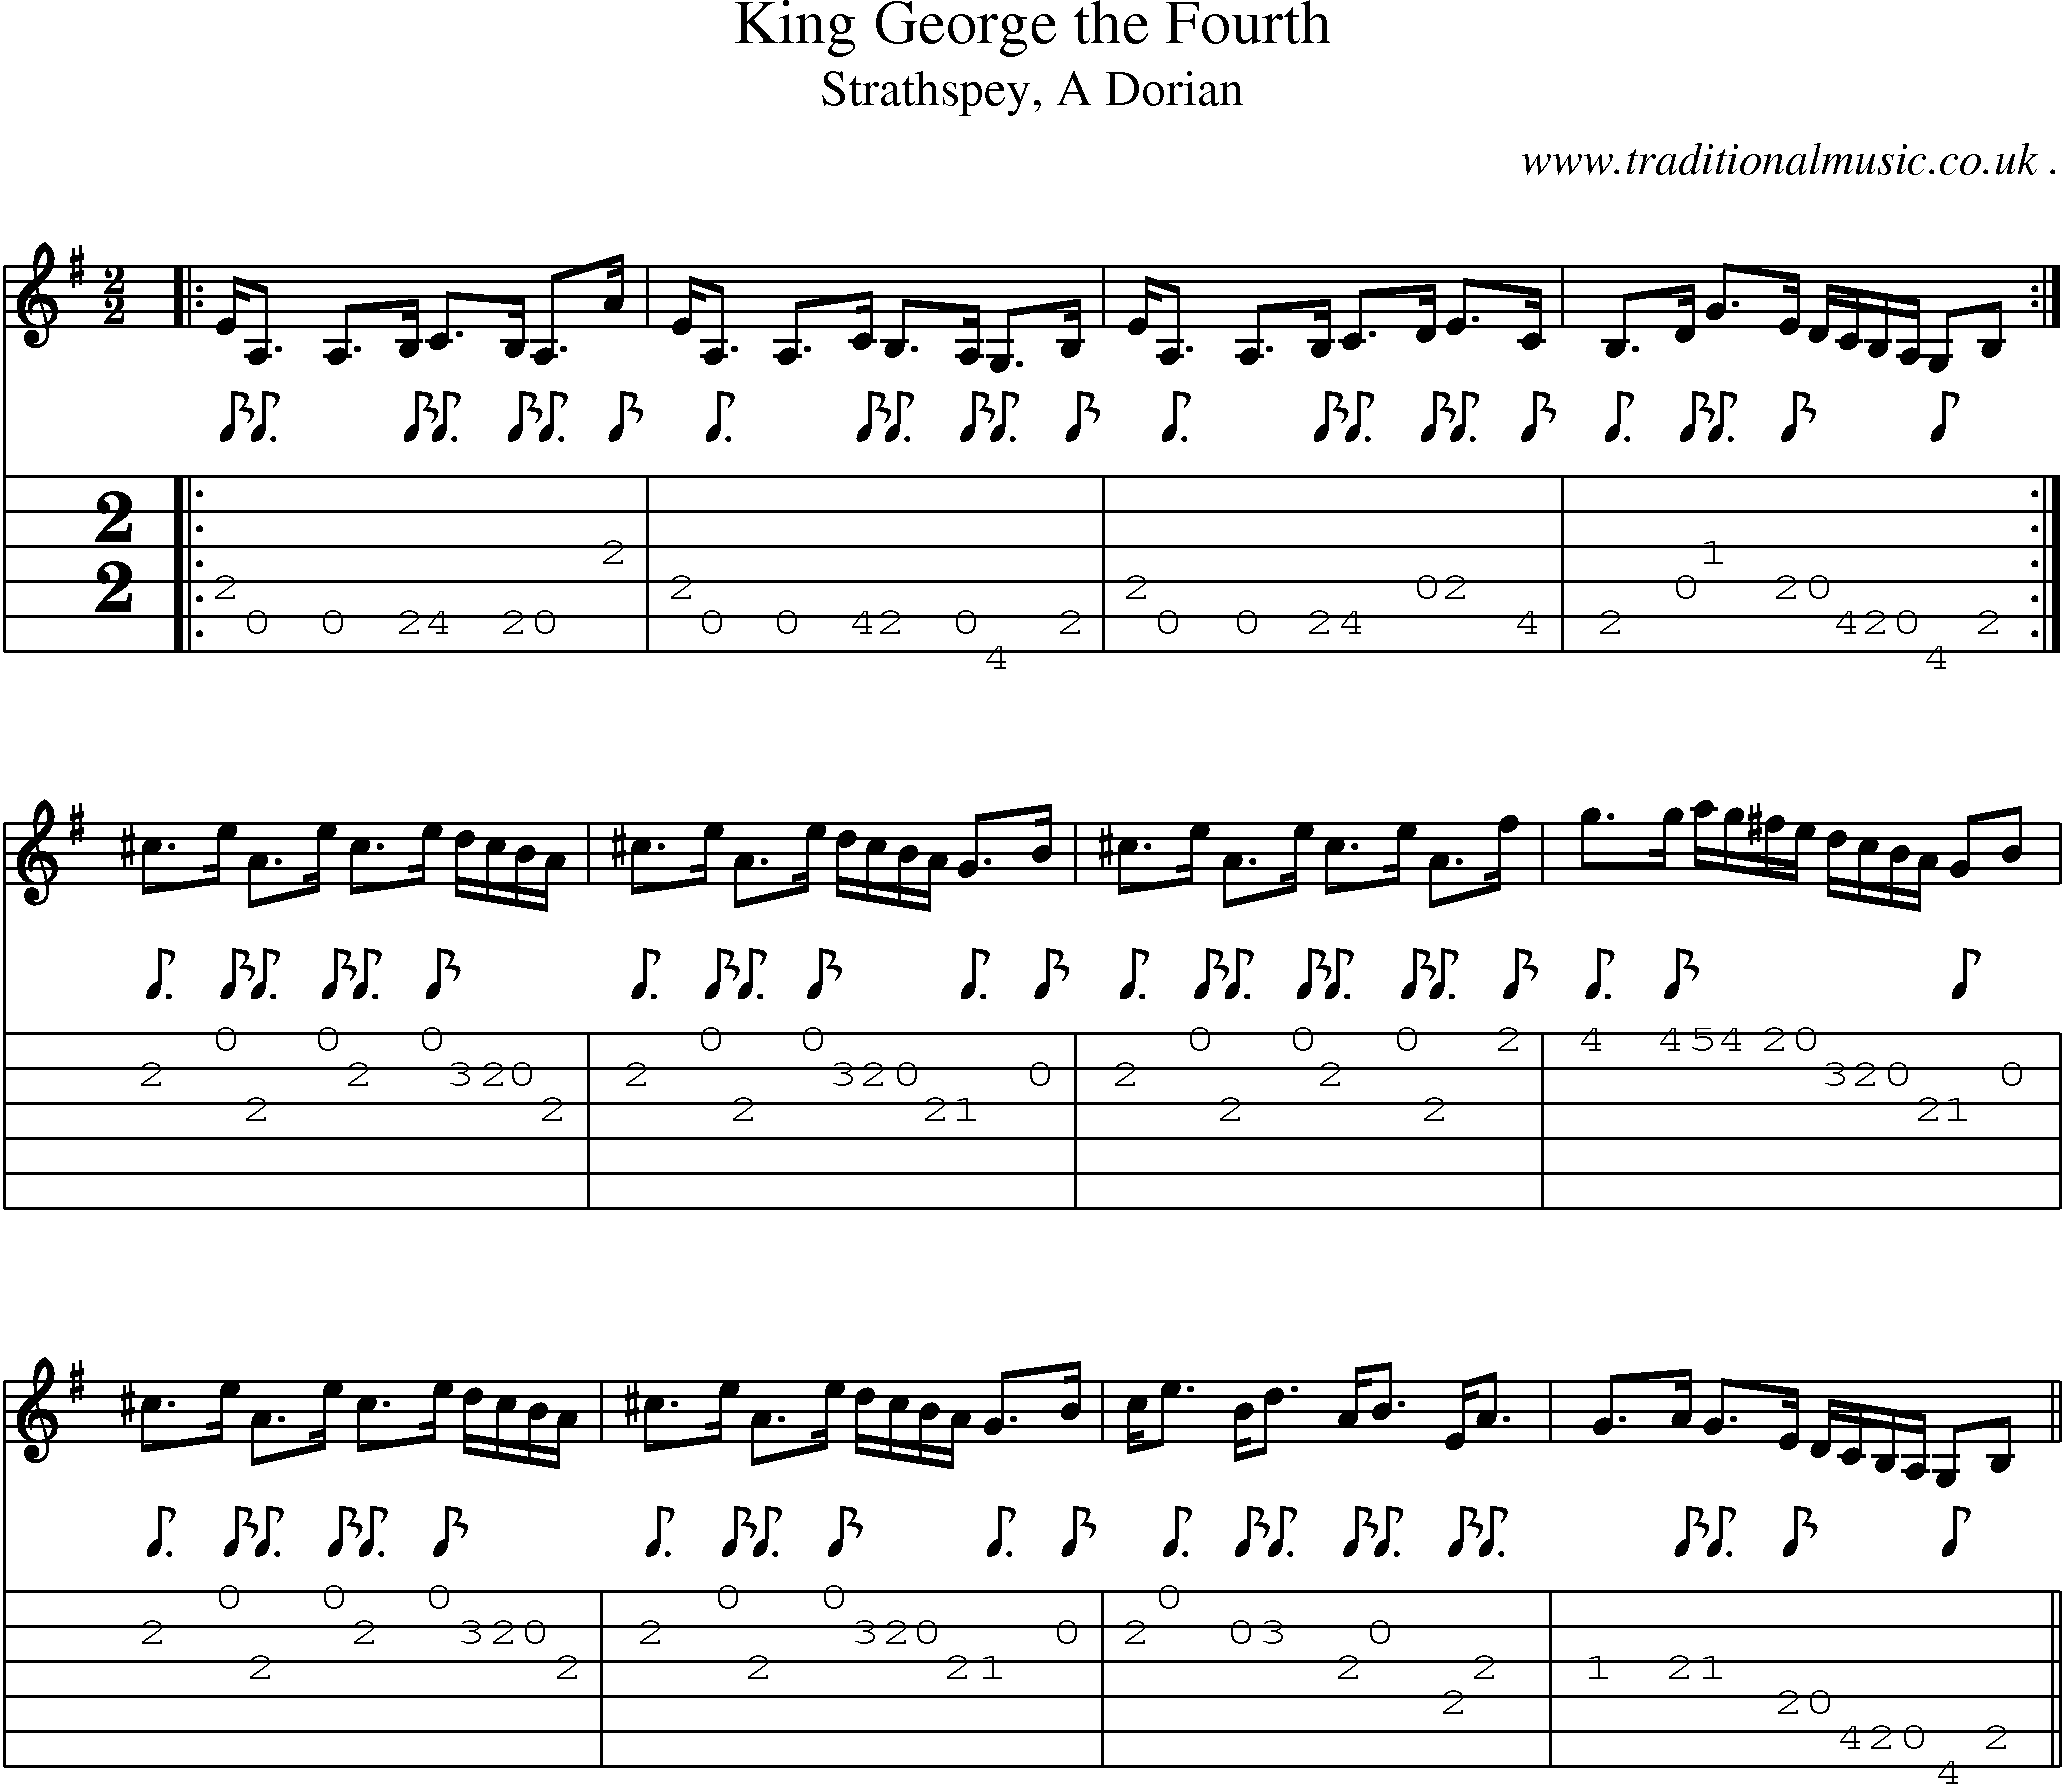 Sheet-music  score, Chords and Guitar Tabs for King George The Fourth